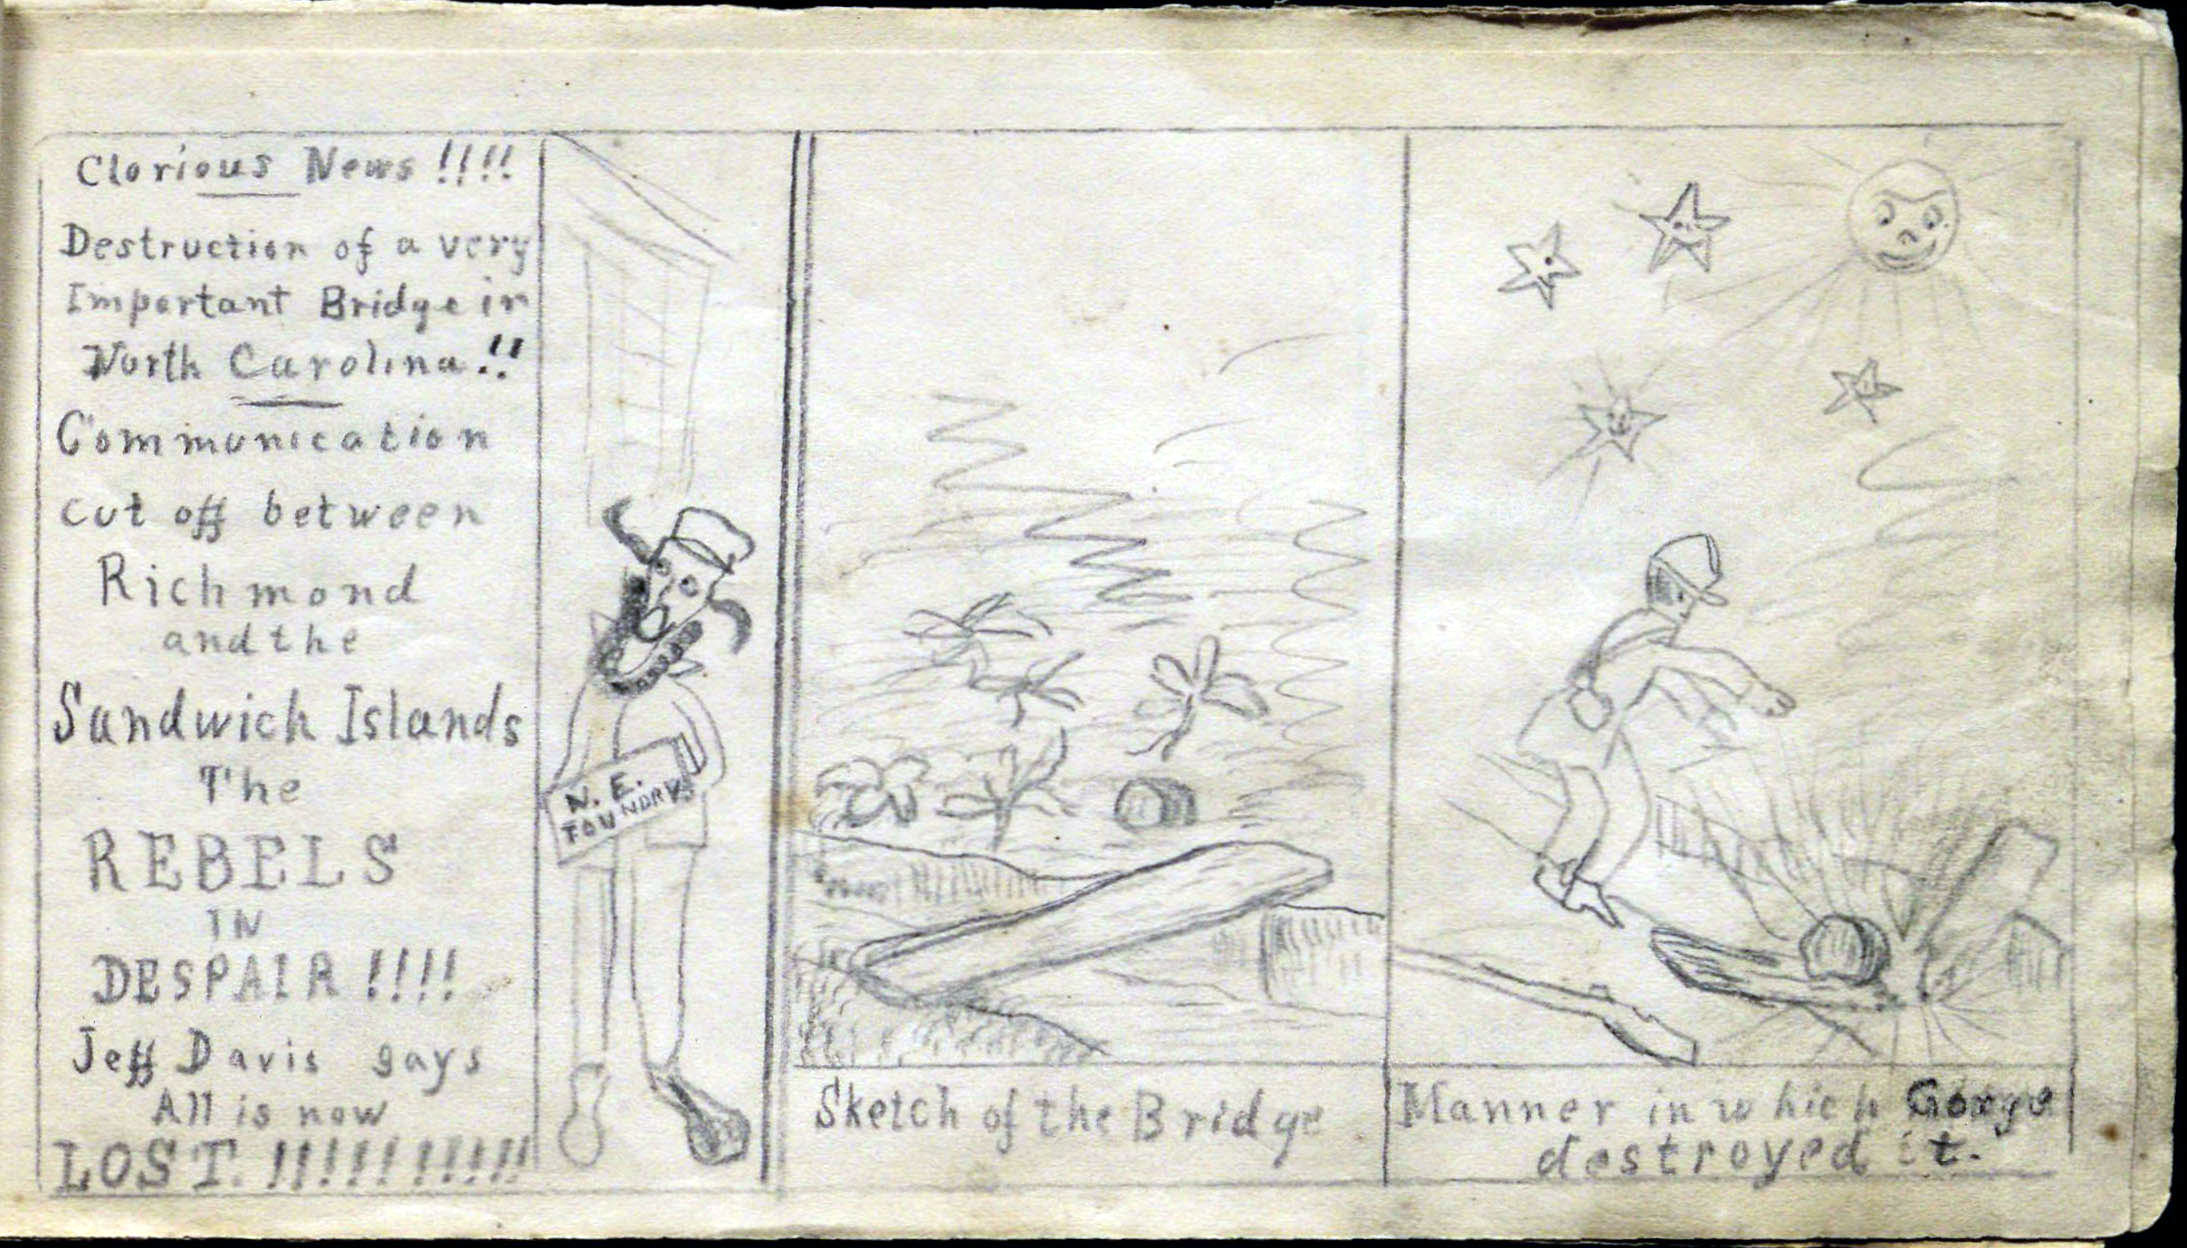 “Glorious News!!!!” in “A Few Scenes in the Life of A ‘SOJER’ in the Mass 44th,” 1863, graphite on paper (Gilder Lehrman Institute of American History)